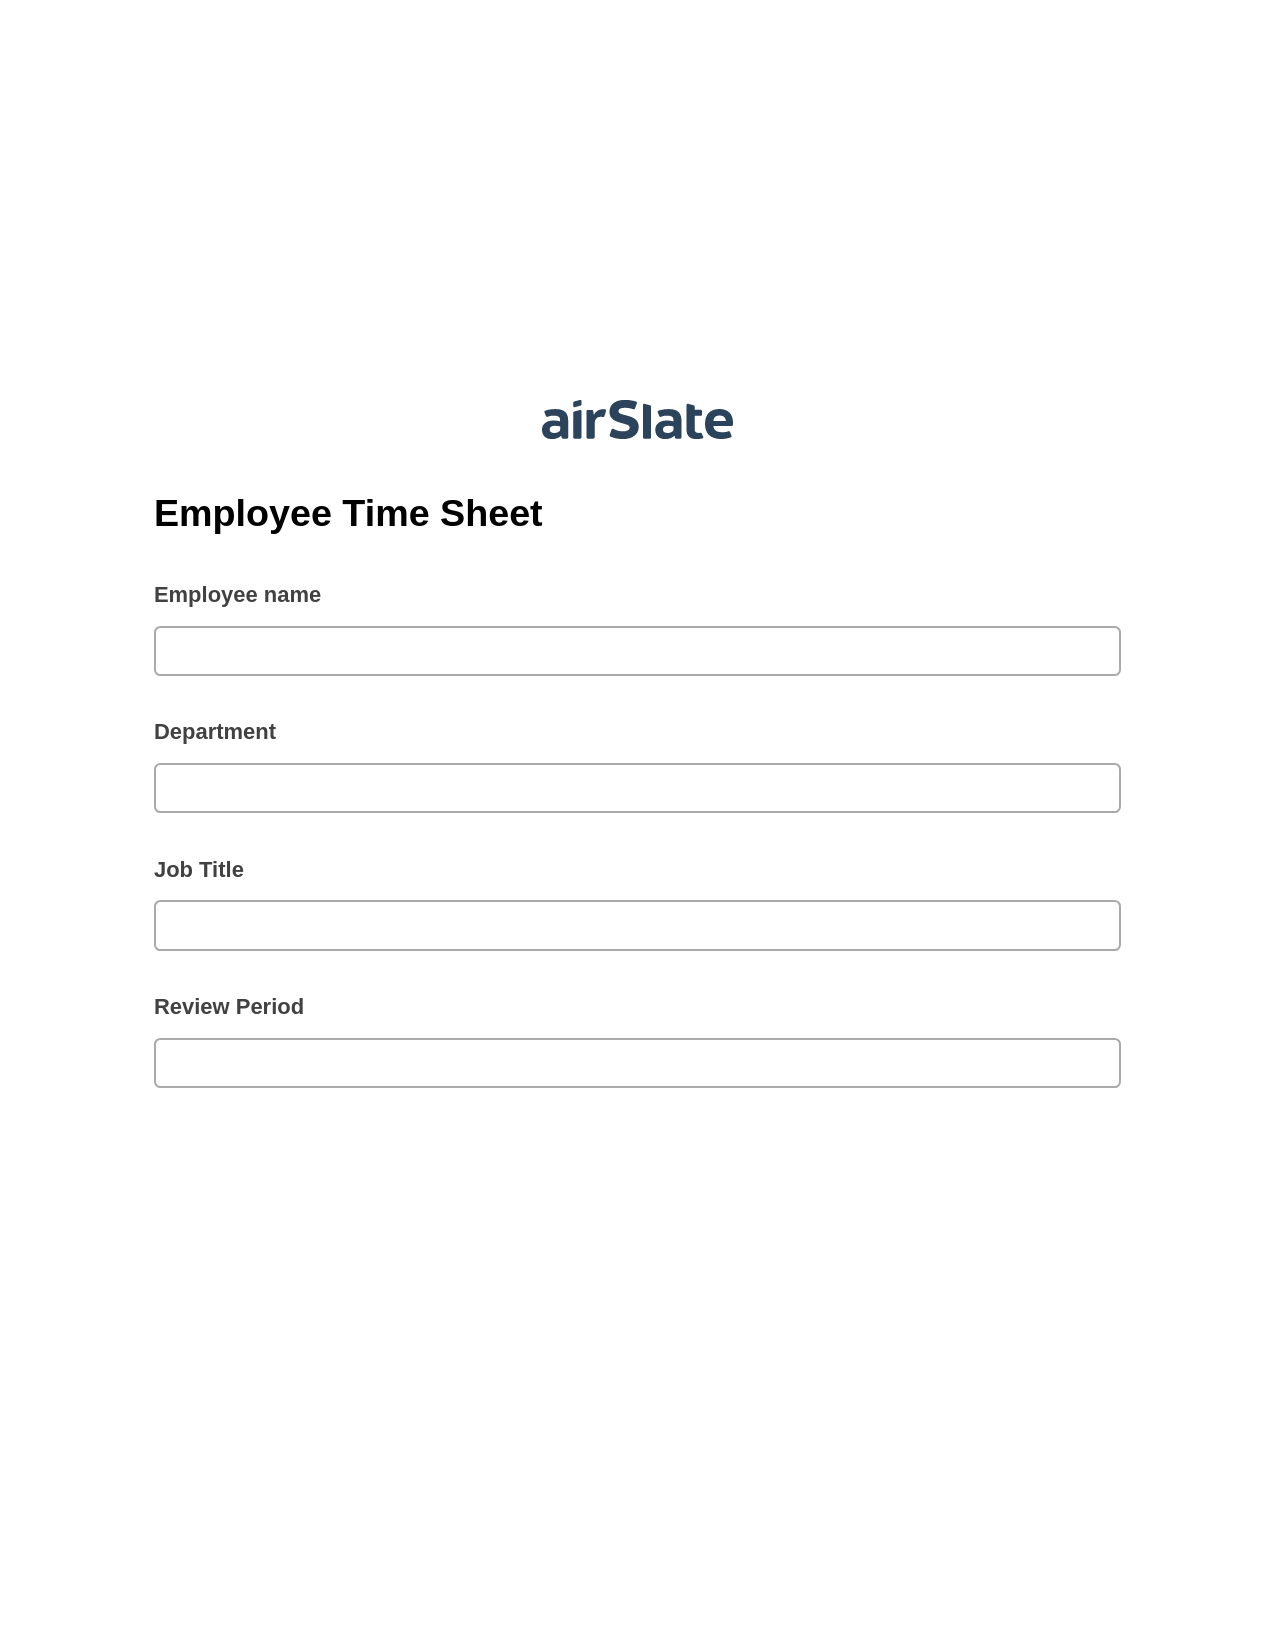 Employee Time Sheet Pre-fill Dropdowns from CSV file Bot, Create Salesforce Records Bot, Export to NetSuite Bot